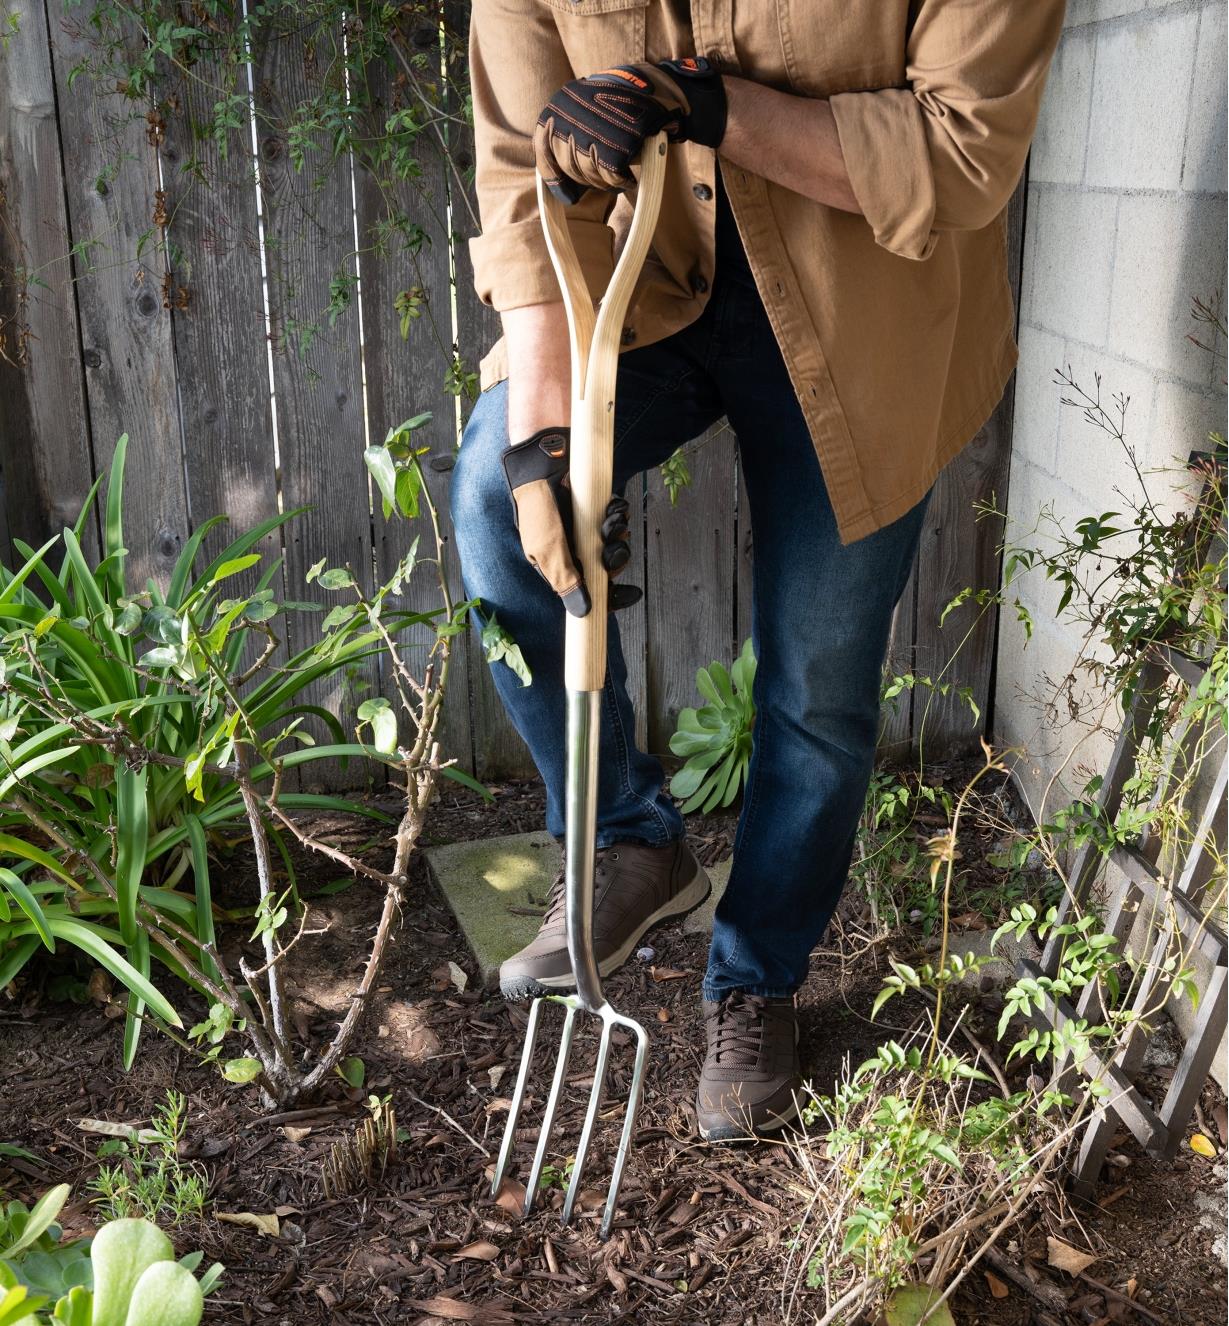 A gardener pushes the border fork into the ground